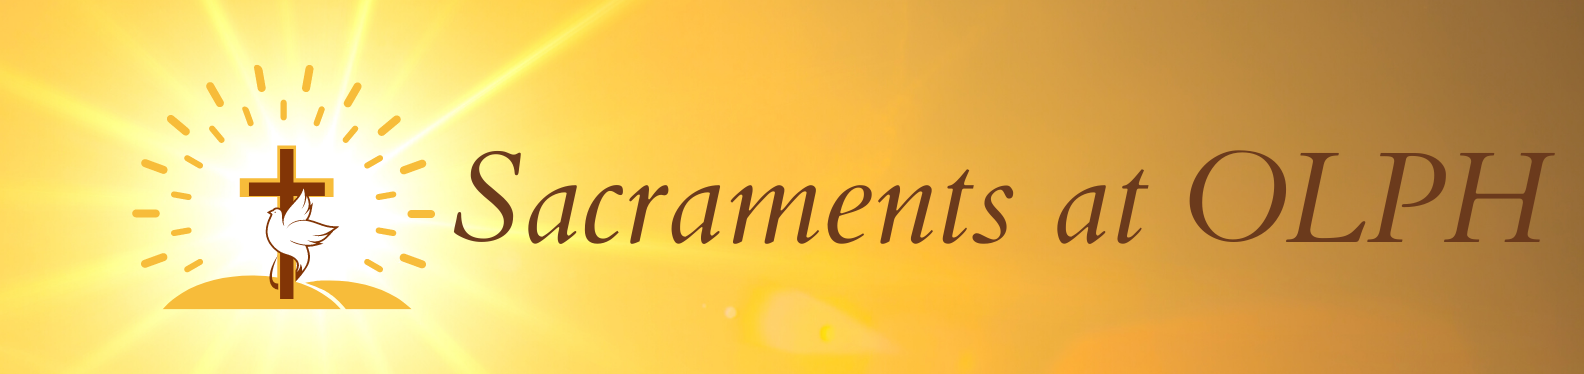 Yellow banner with cross and text "Sacraments at OLPH"